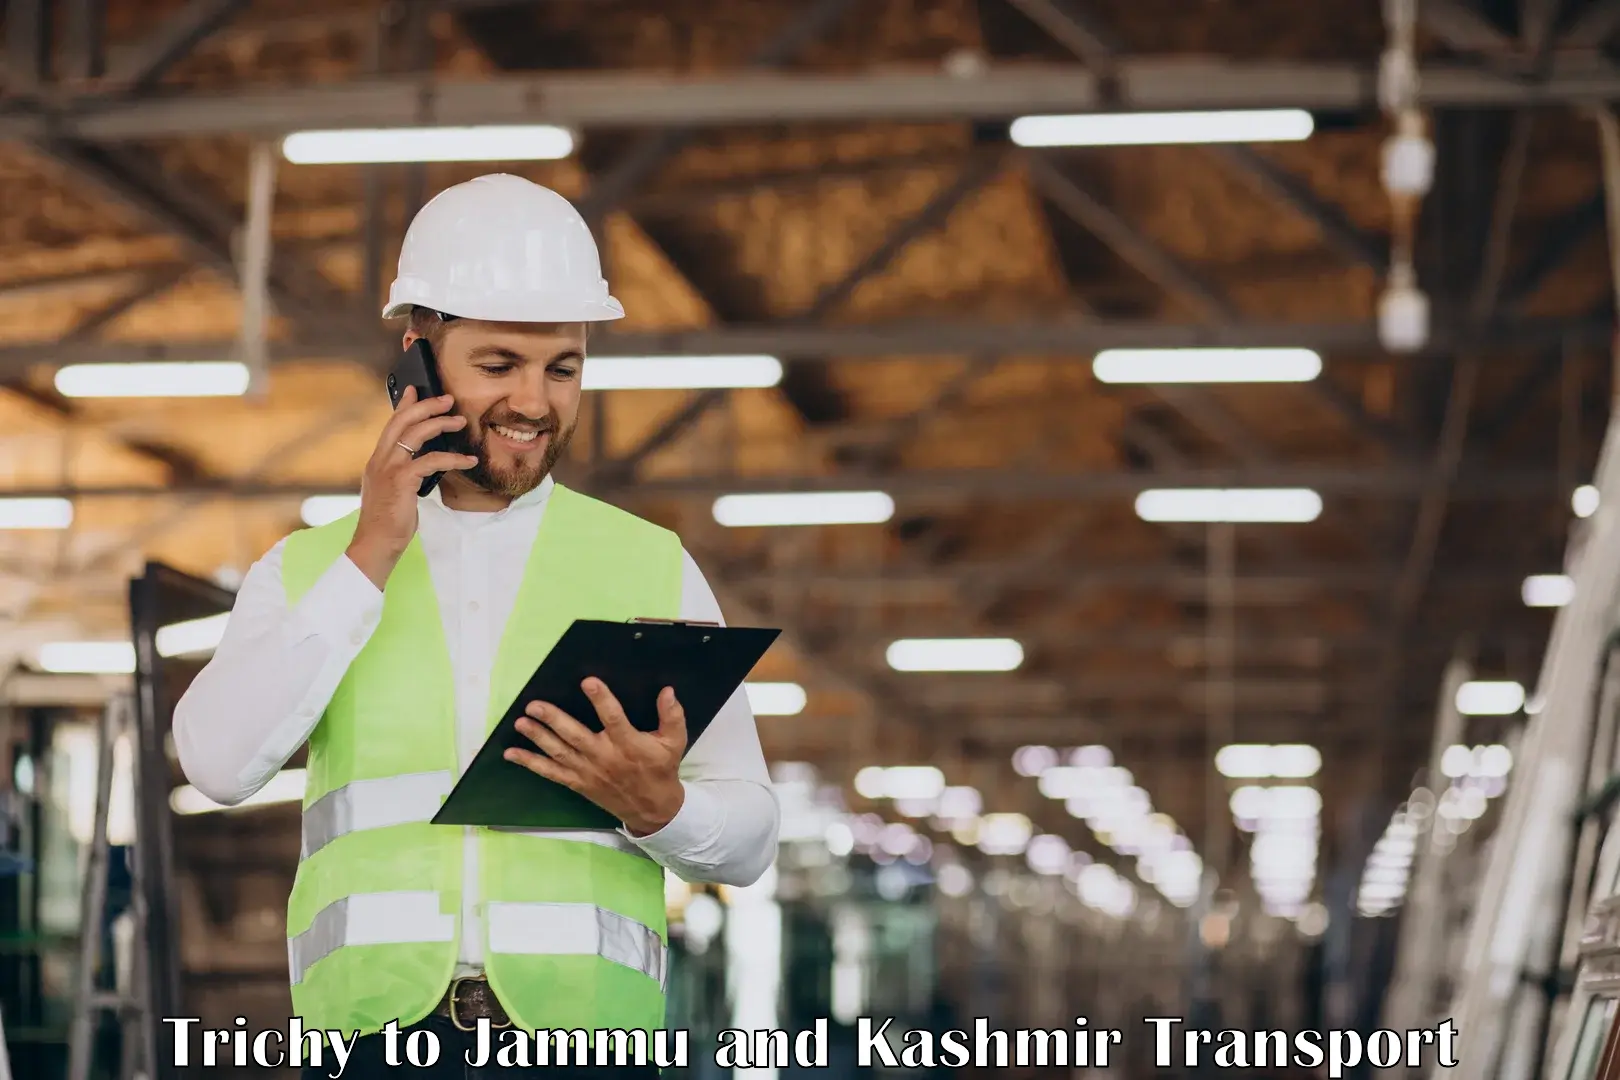 Inland transportation services Trichy to Jammu and Kashmir